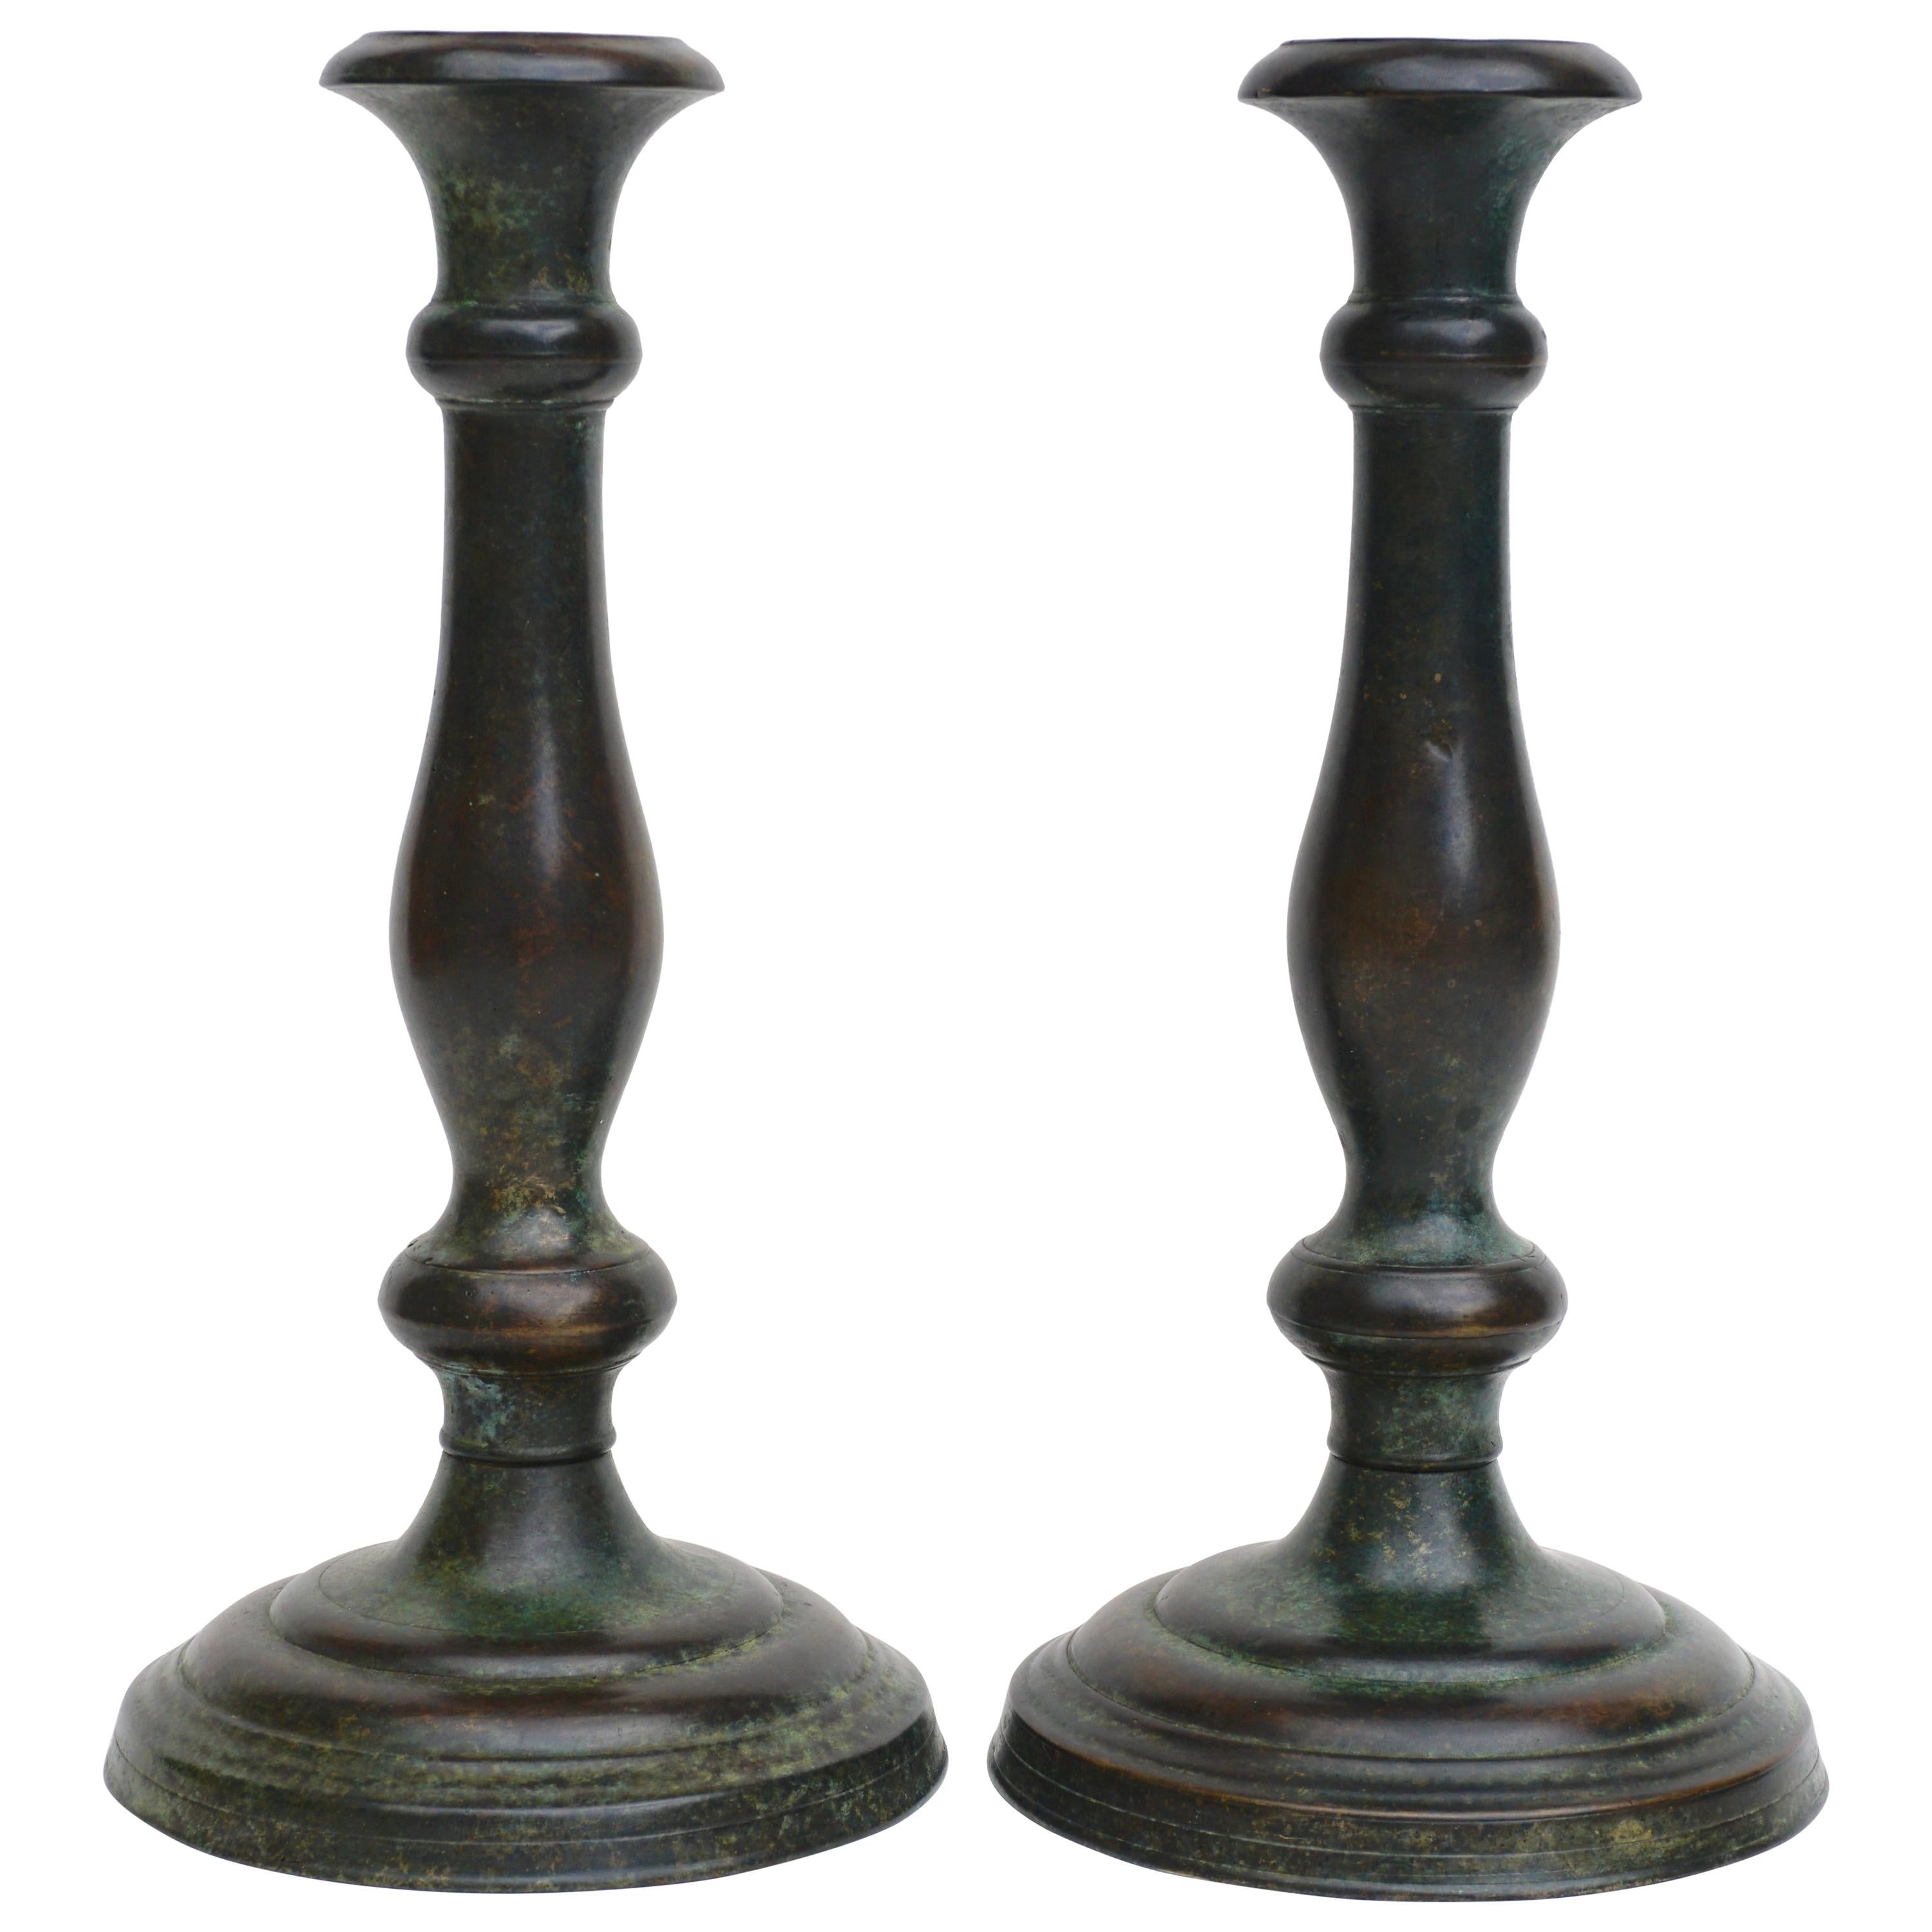 A rare pair of Art Nouveau heavy cast patinated brown, green and umber bronze candelabra candle sticks. 

The underside marked Tiffany Studios New York conjoined with G & D CO monogram for Tiffany Glass and Decorating Company. Of simple baluster